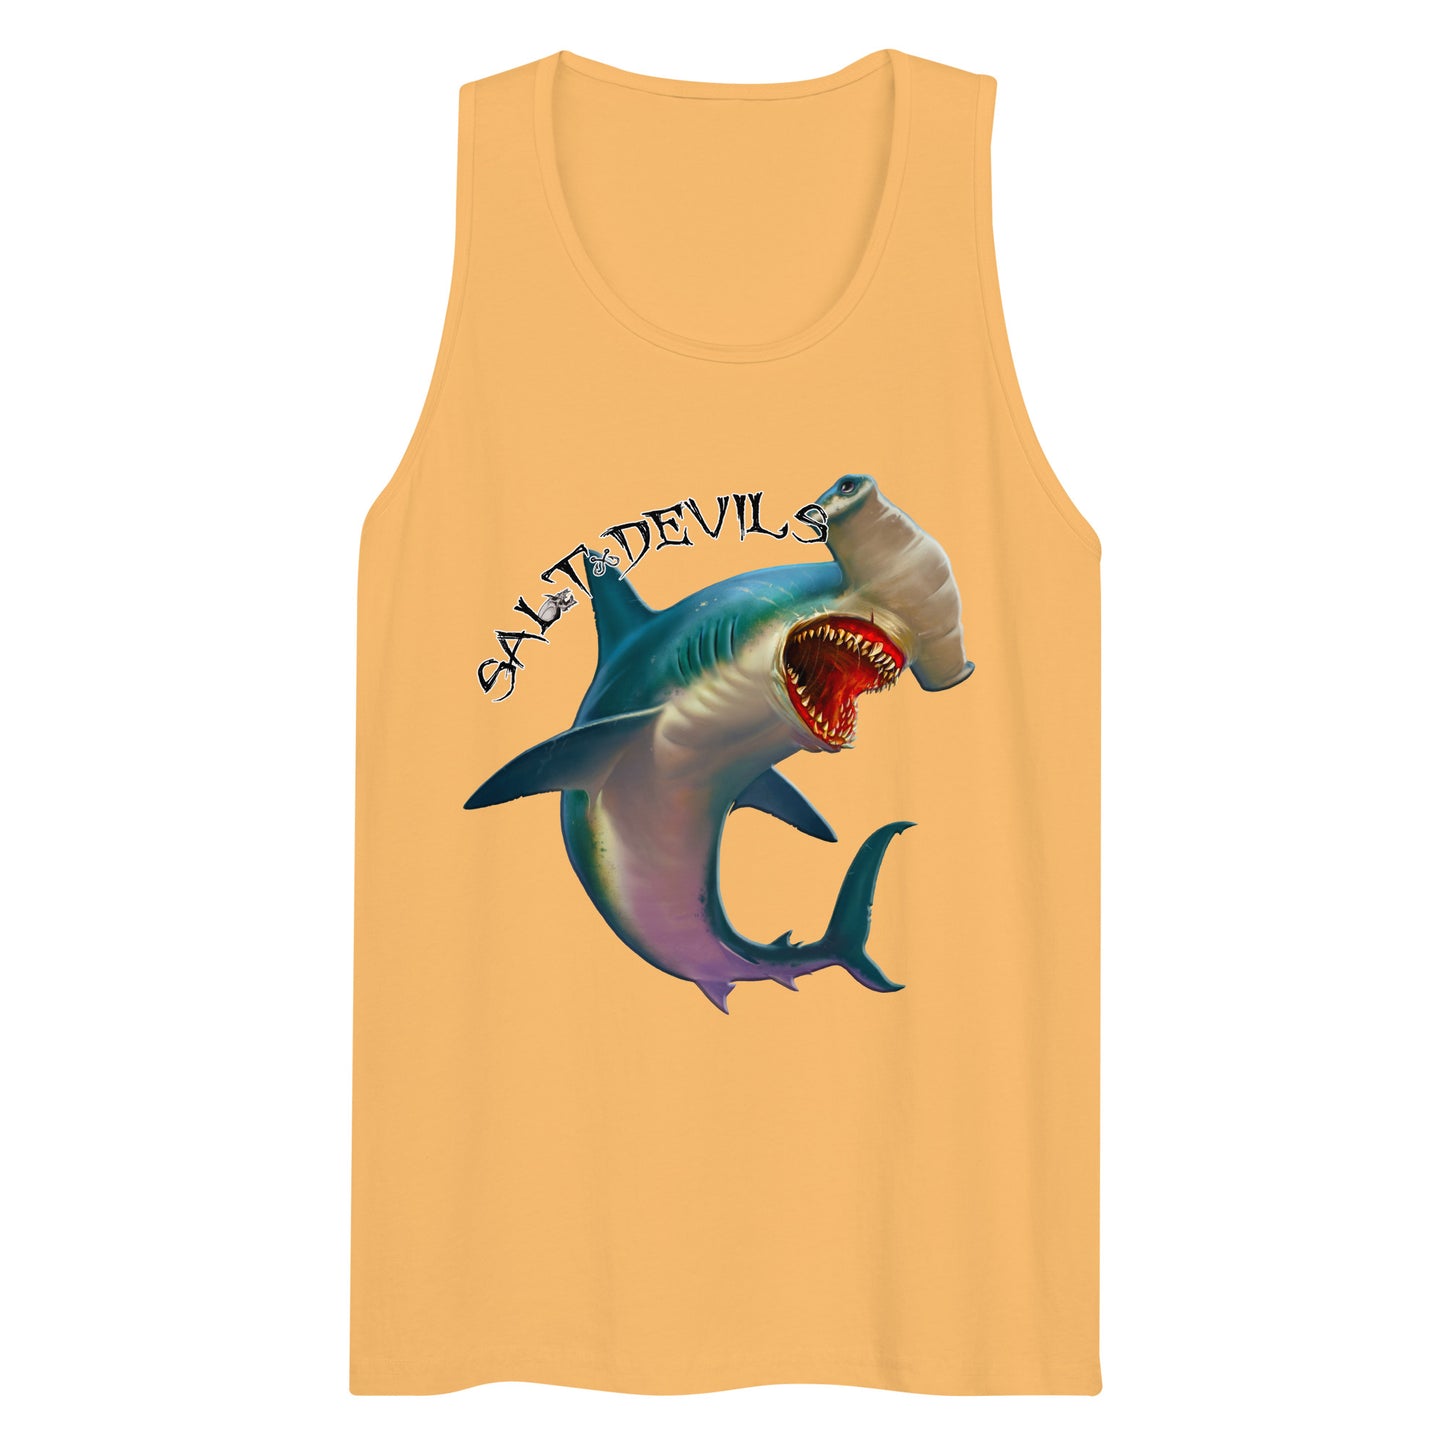 The Hammer Tank Top